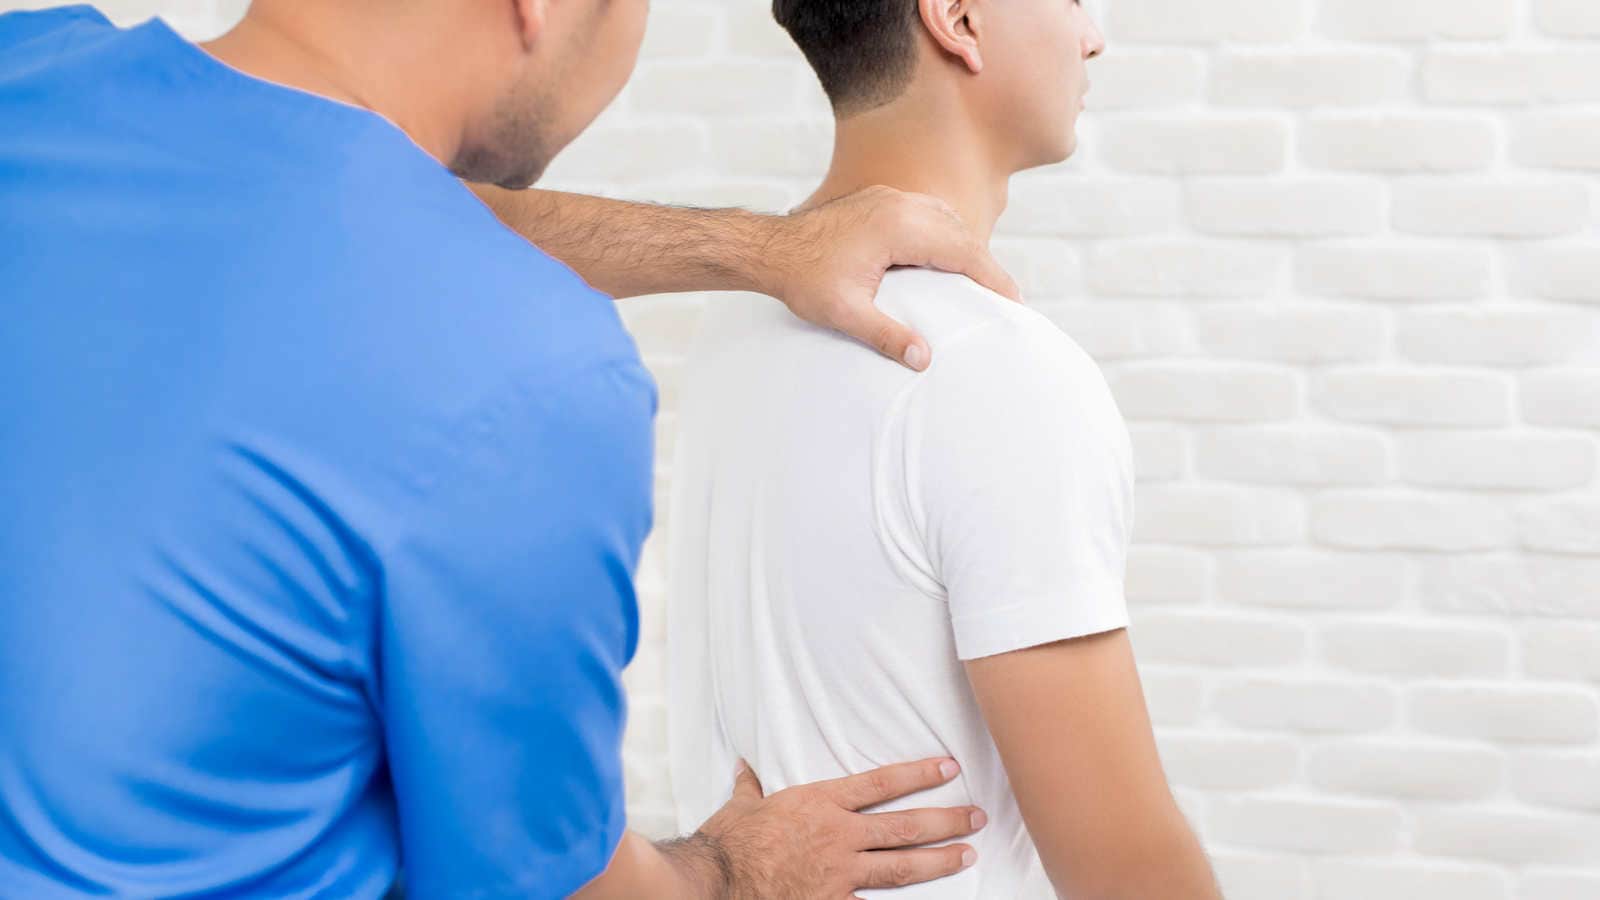 Mission Chiropractic and Wellness of Columbus